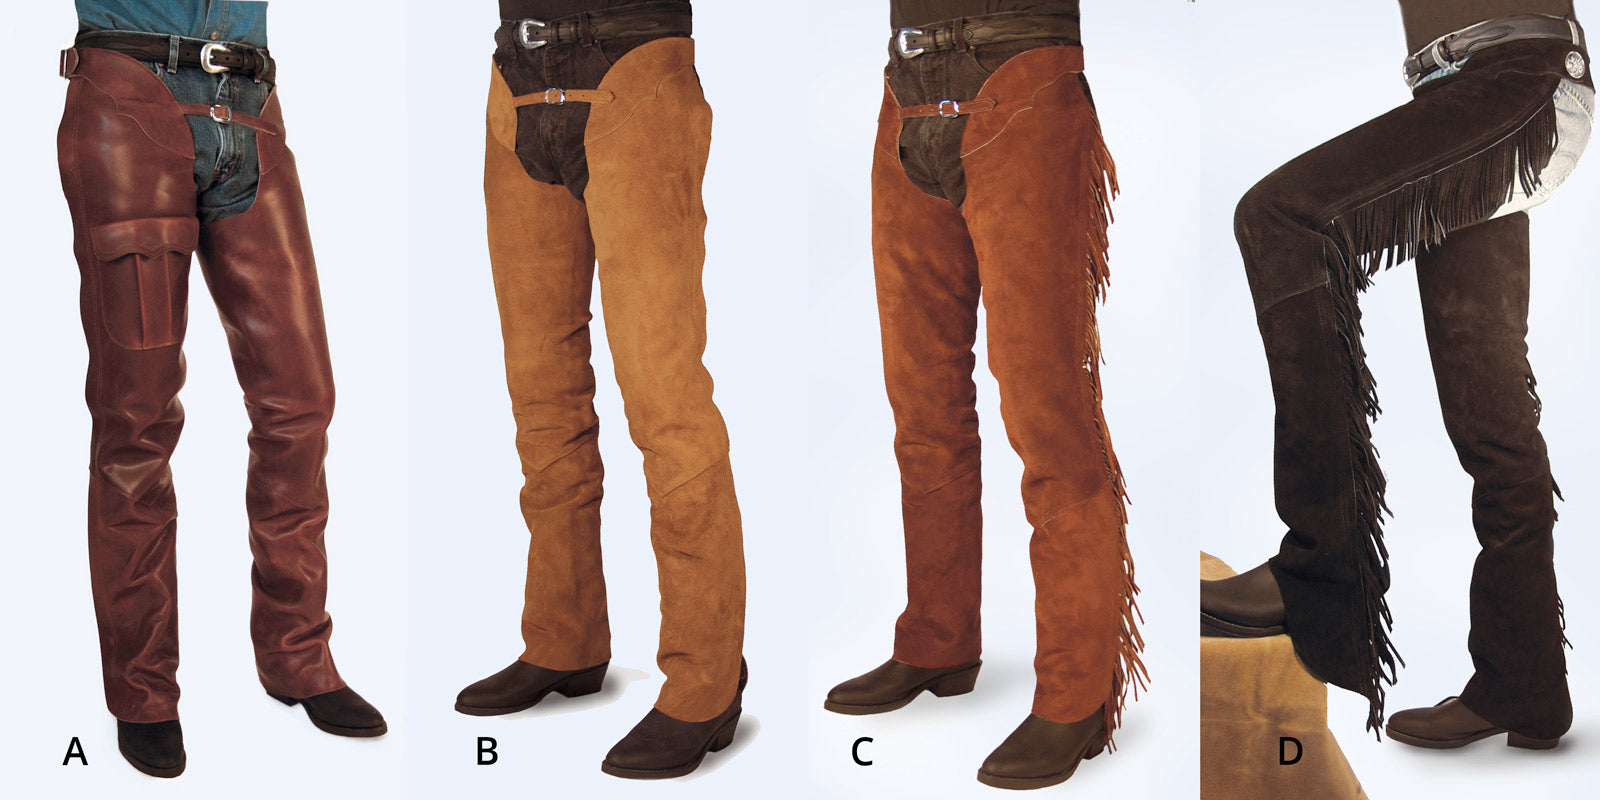 Models wearing four types of western chaps: Work Chaps, Boot Cut Chaps, Fringe, and Equitation